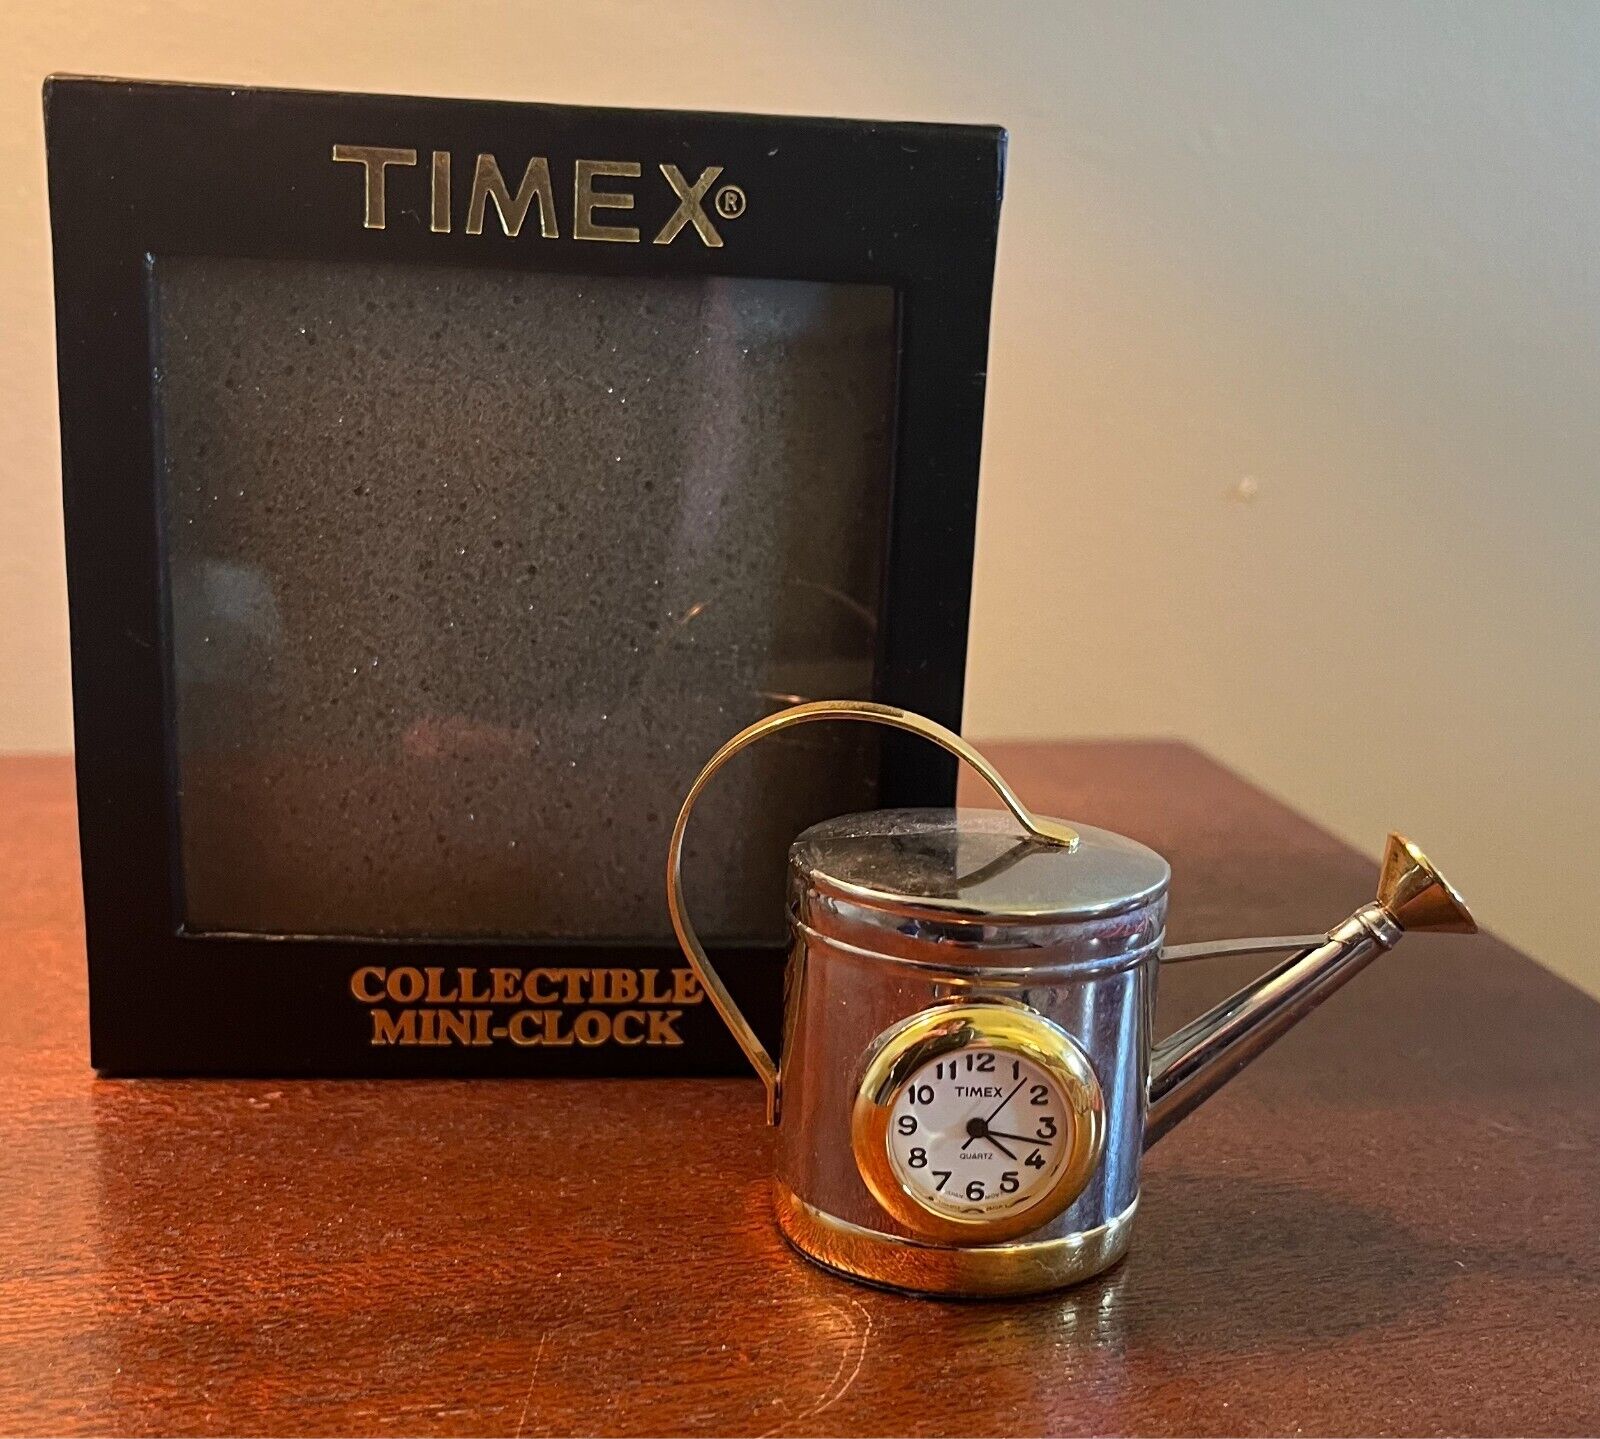 Vintage Timex Collectible Mini Clock - Watering Can in Box